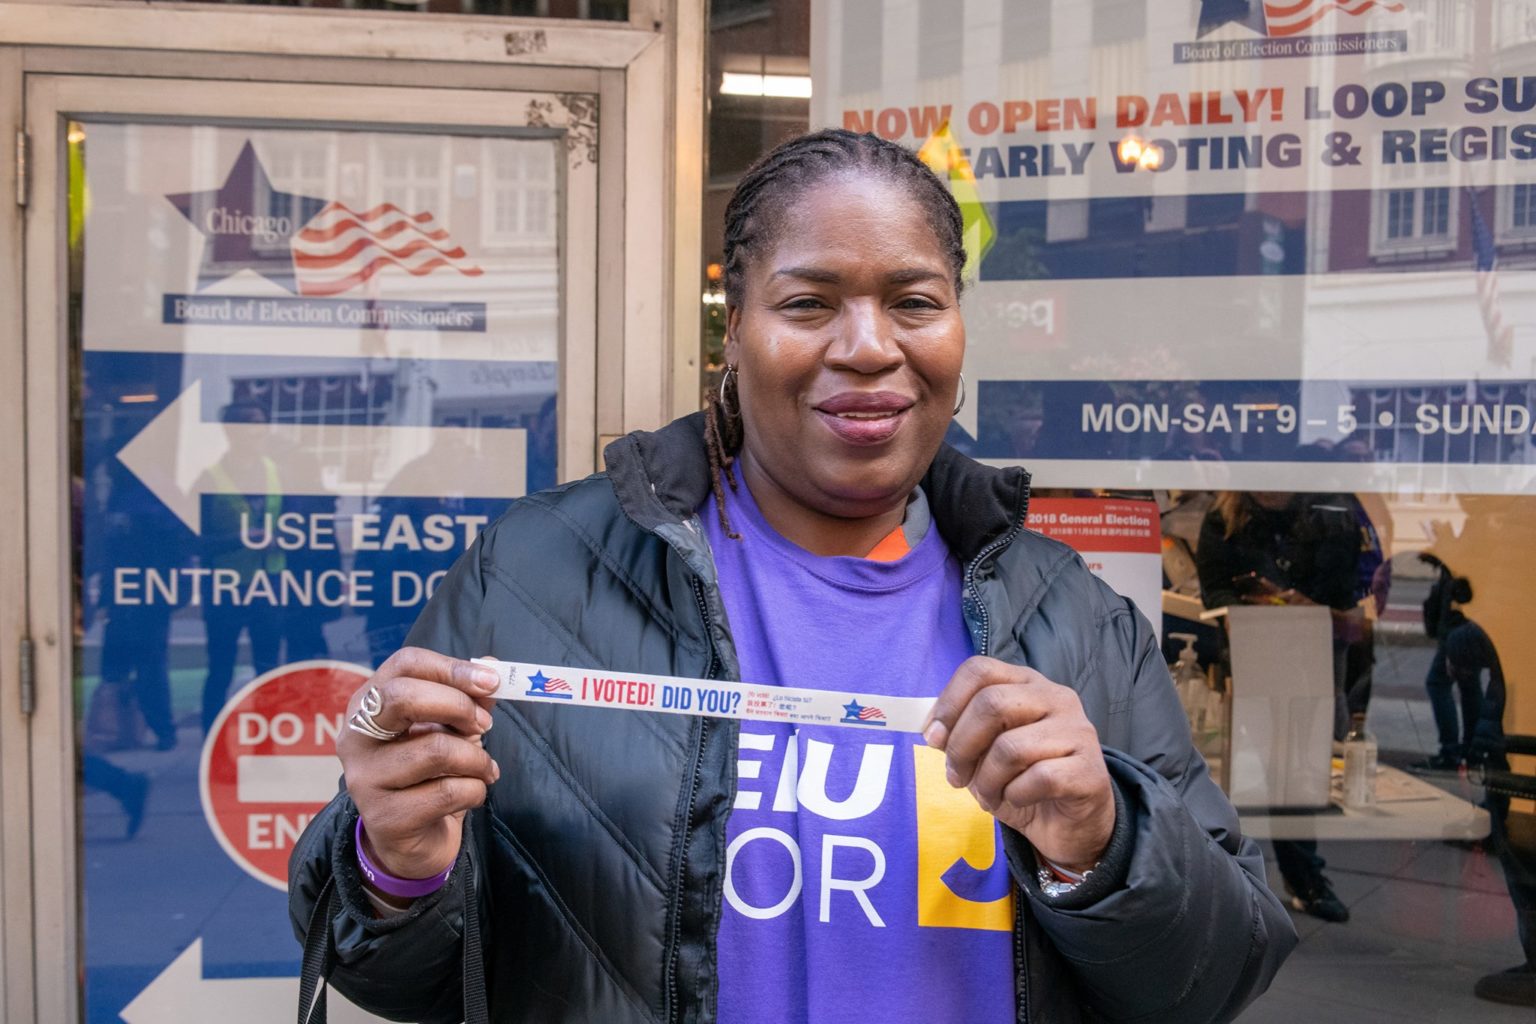 SEIU Illinois State Council Announces Endorsements of Candidates in June Primary